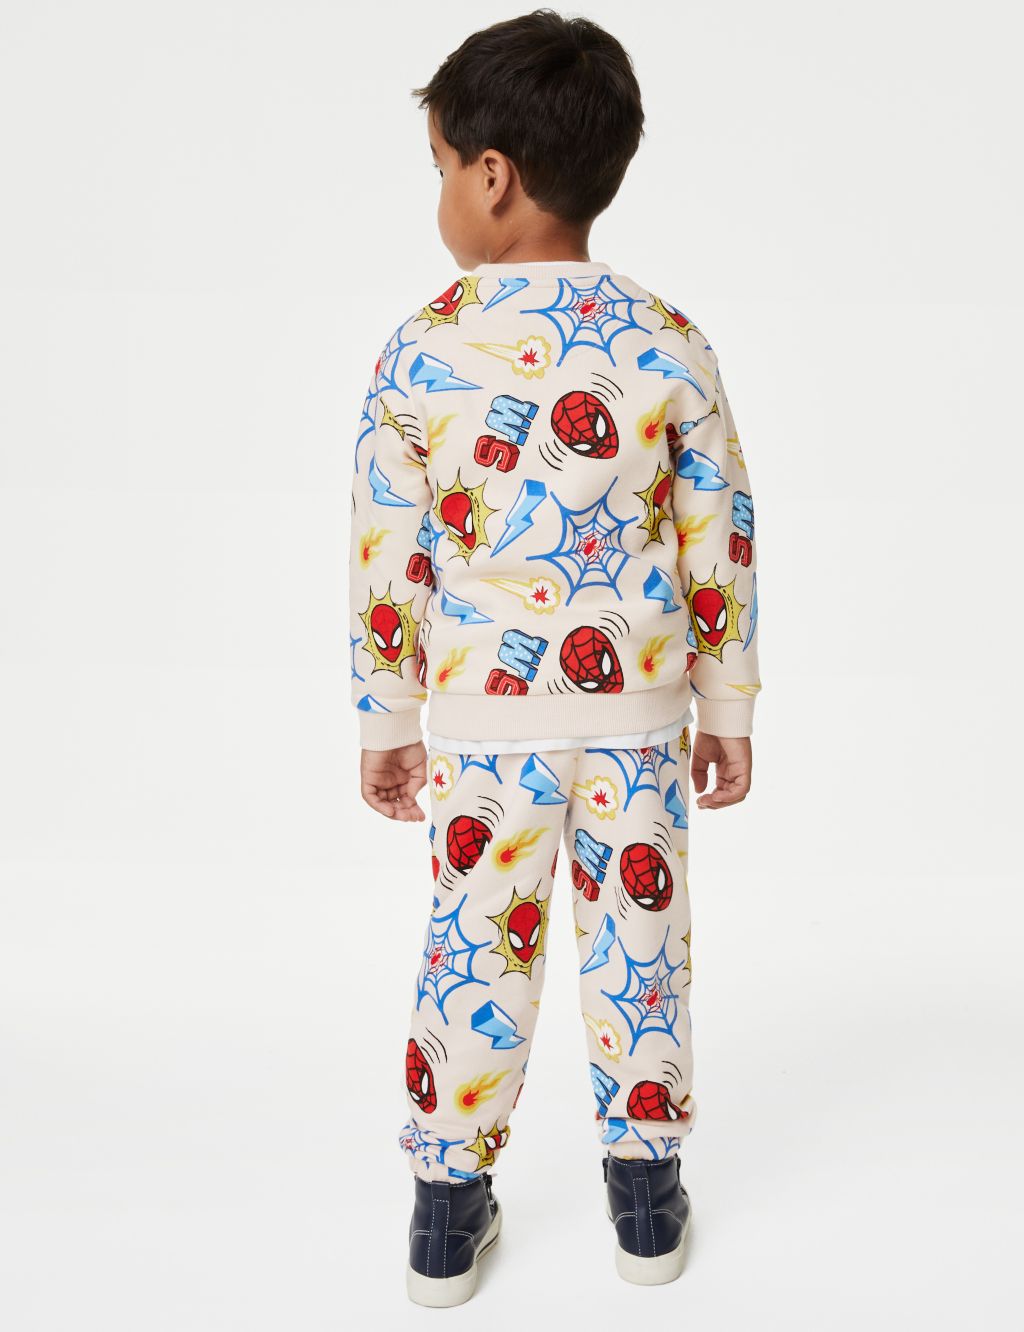 Cotton-Rich Spider-Man™ Top & Bottom Outfit (2-8 Yrs) image 4